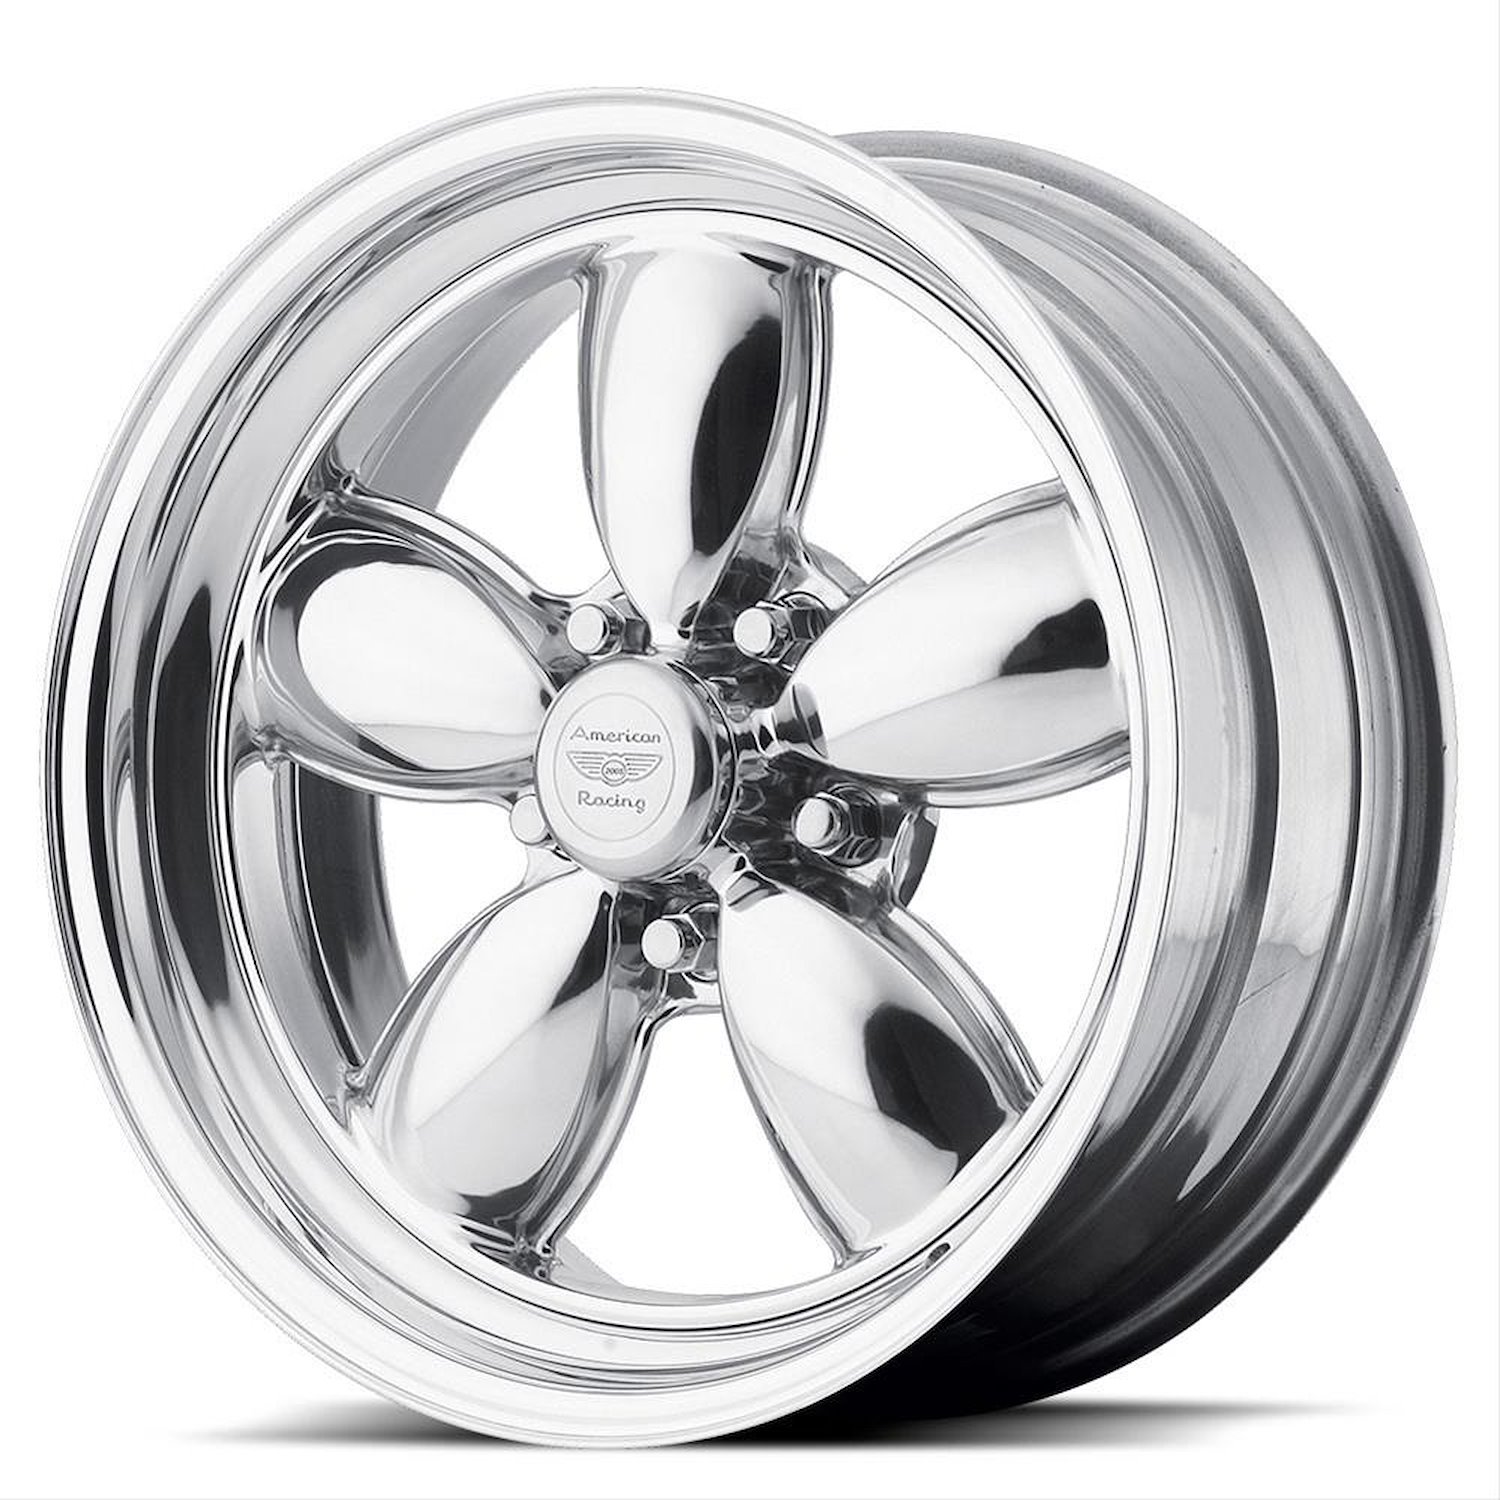 AMERICAN RACING CLASSIC 200S TWO-PIECE POLISHED 15 x 10 5X4.75 6 5.74